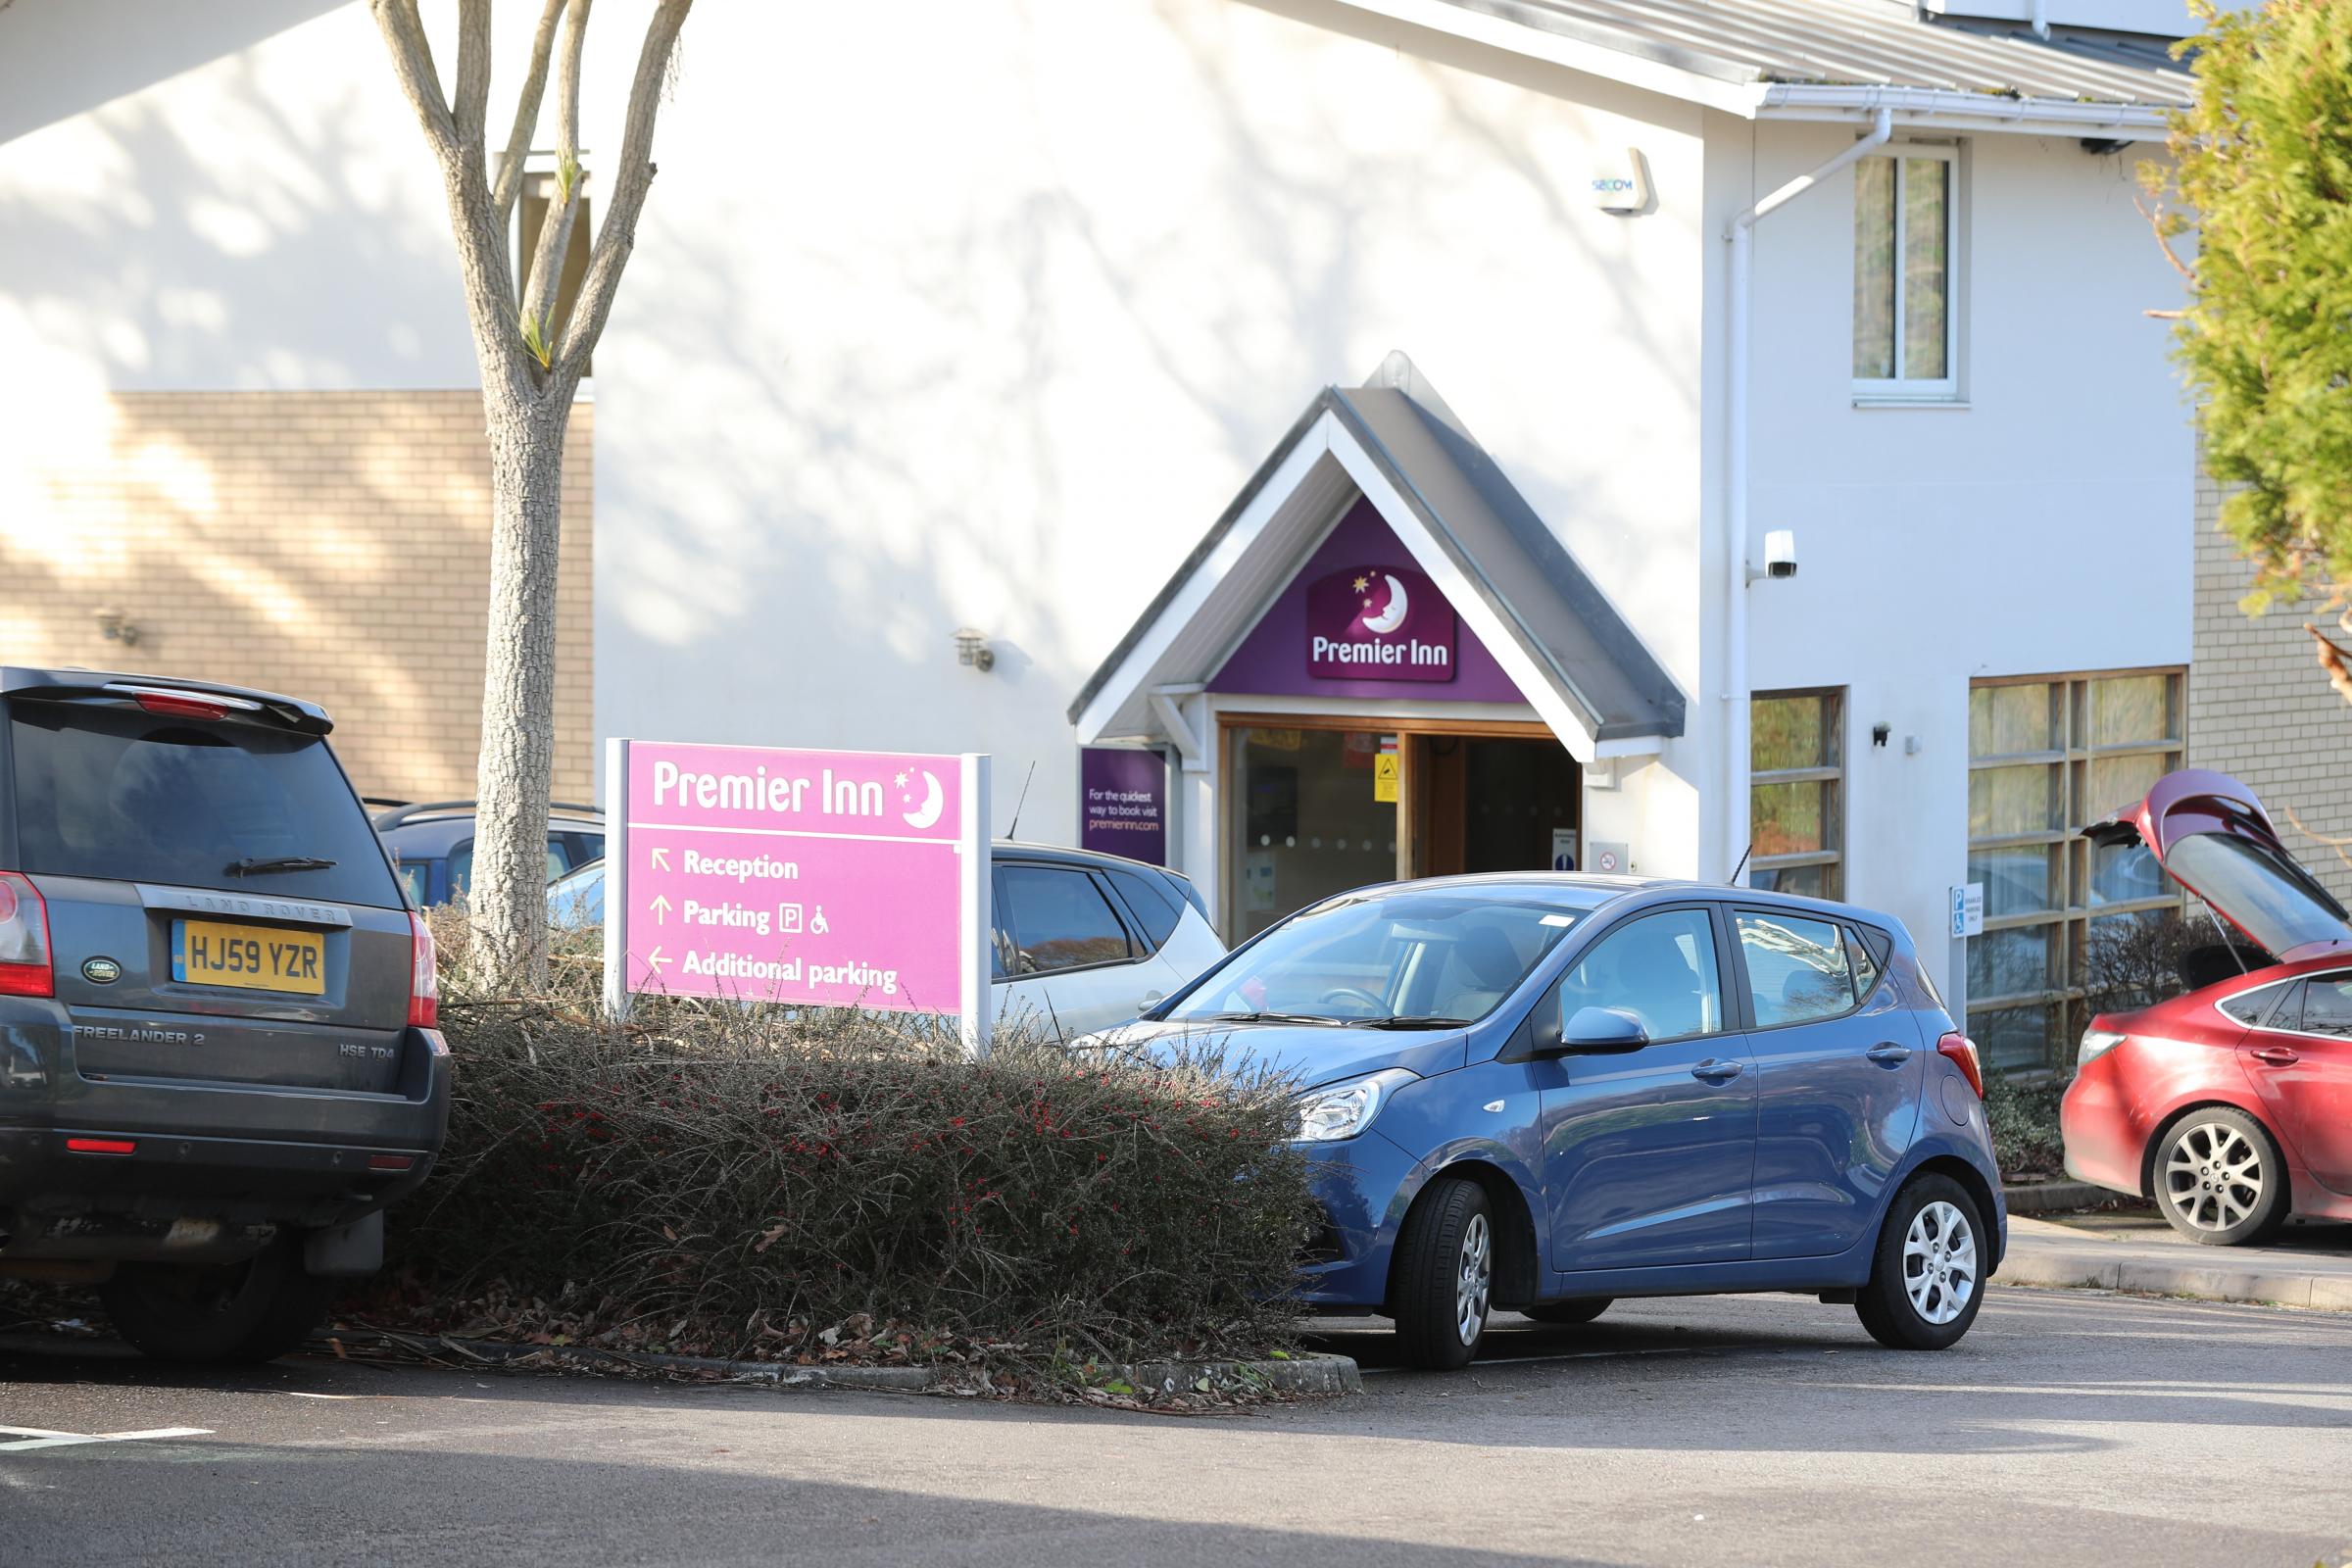 Premier Inn S Extension In Highcliffe Refused Because Of Trees Bournemouth Echo